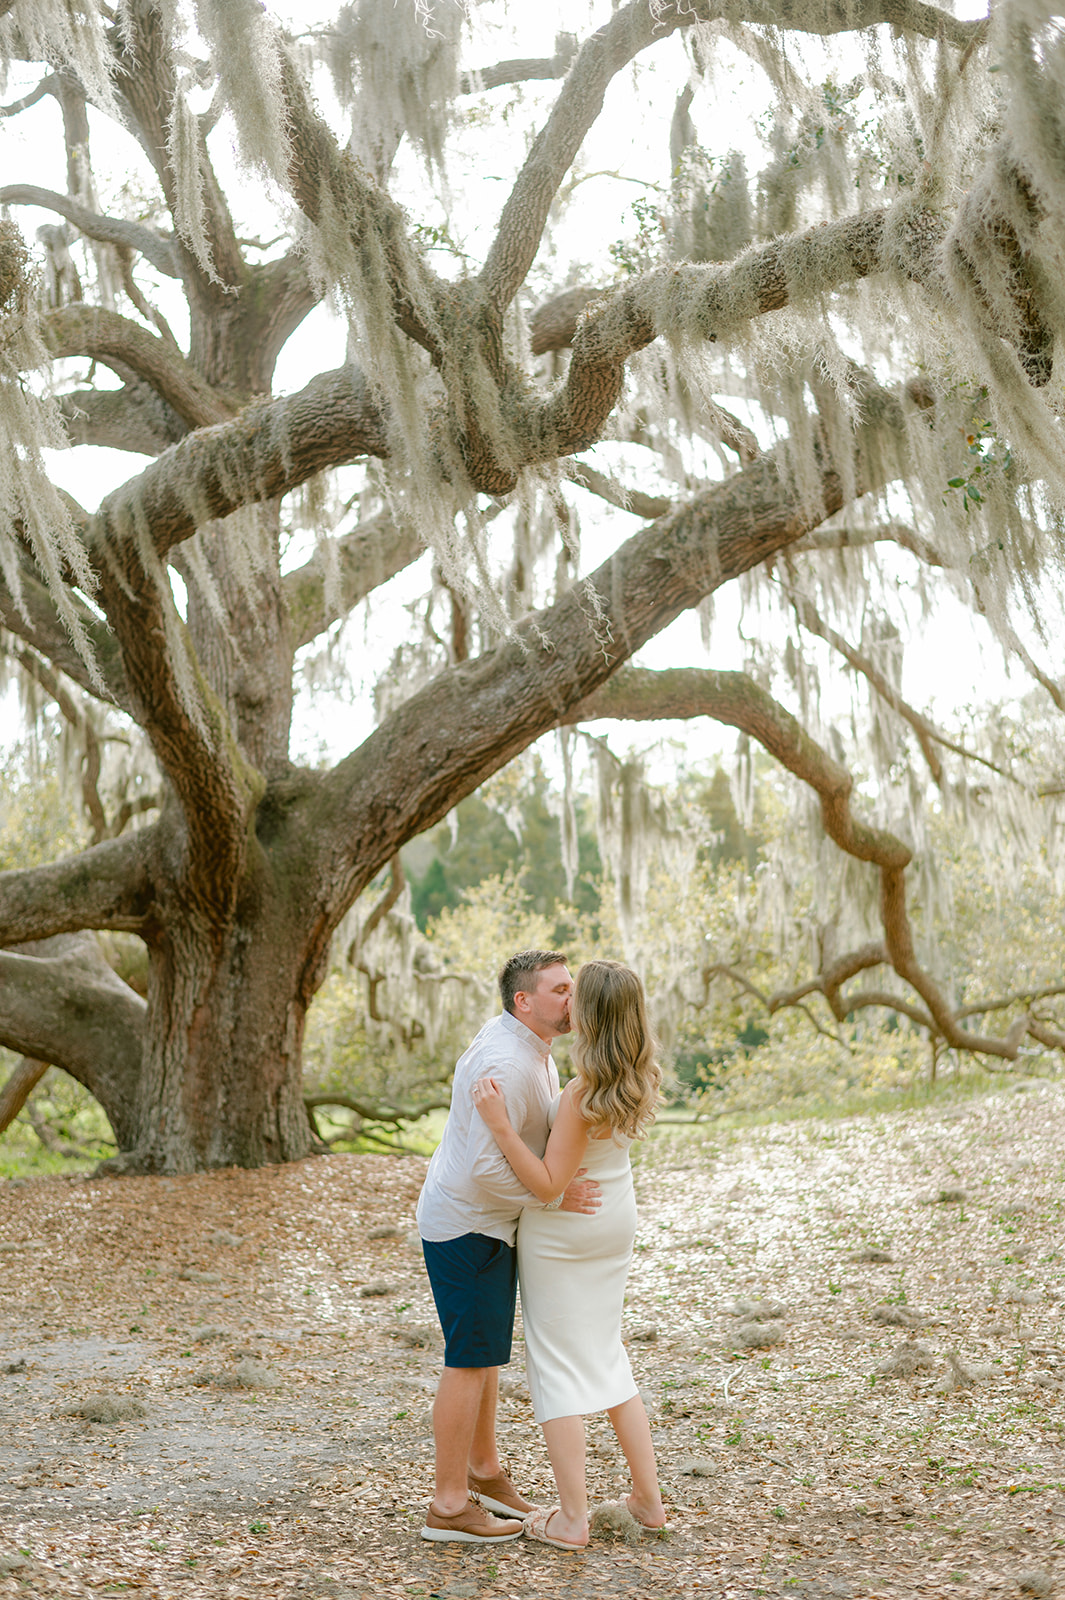 "Outdoor engagement session in sunny Tampa Florida"
